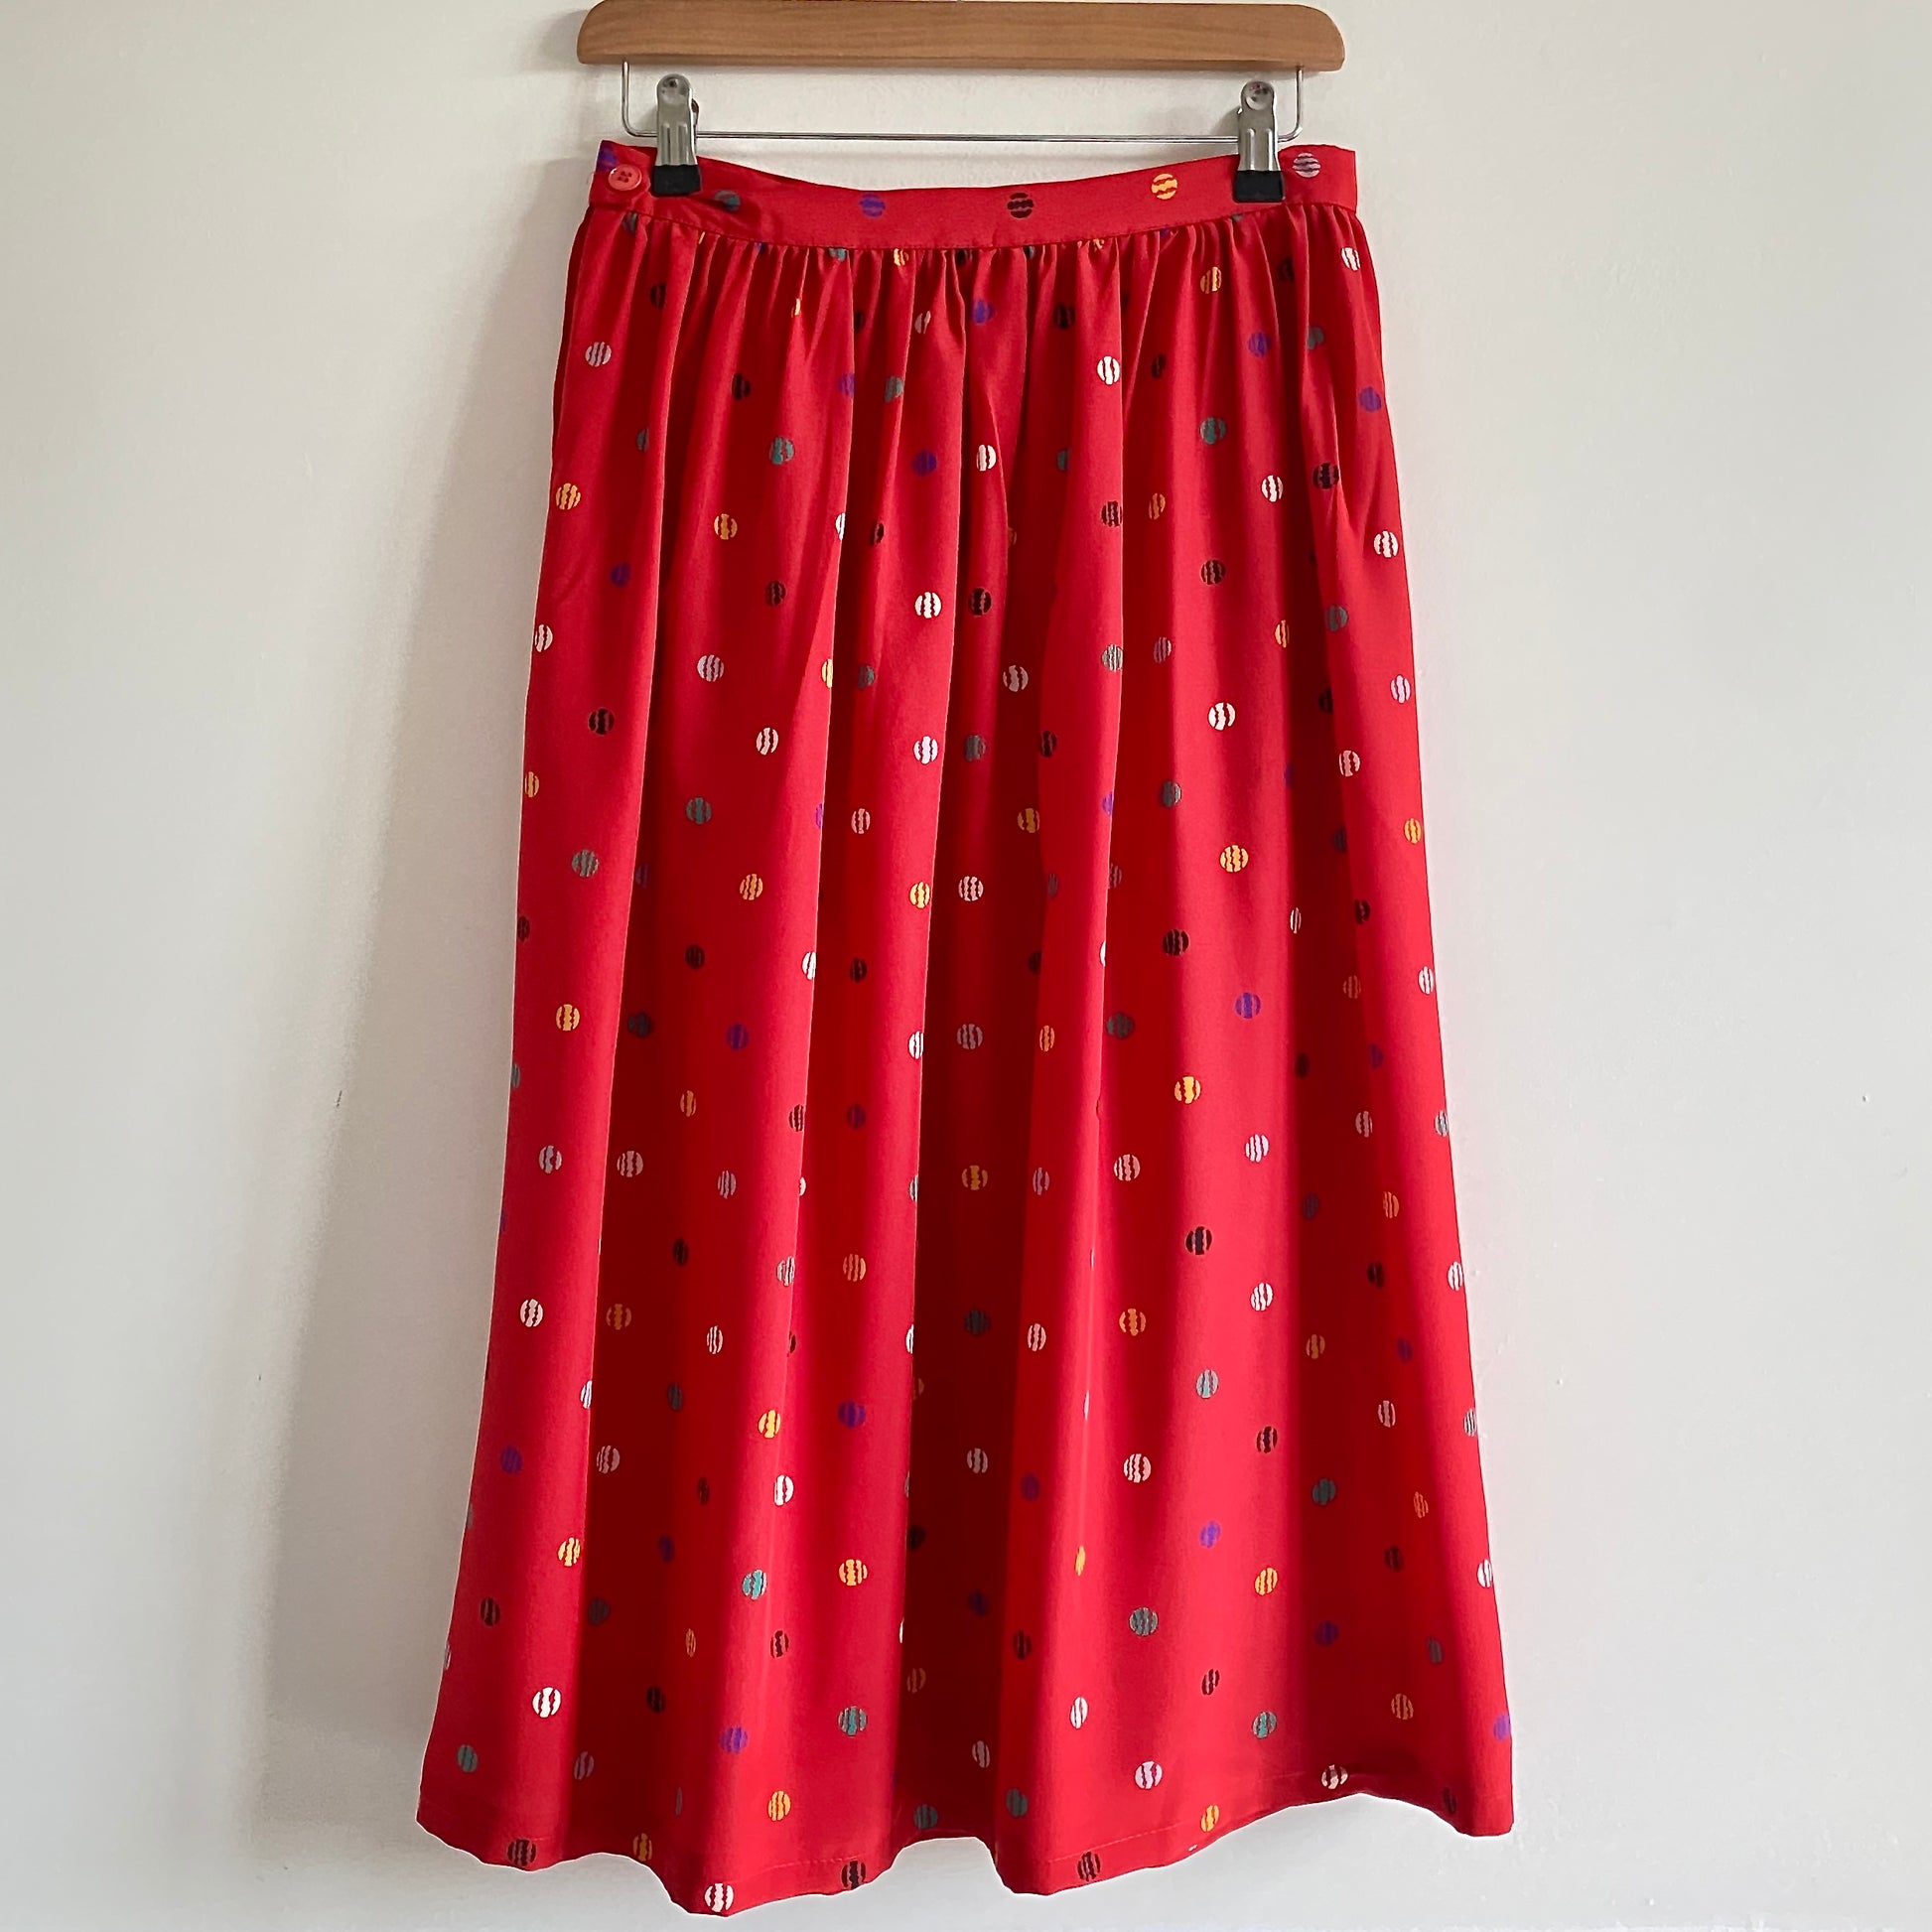      Vintage 80s red patterned midi skirt     By Chaus     Small waistband with side button fastening     Side pockets     Polyester feel fabric     Length 29"     Waist measures 28"